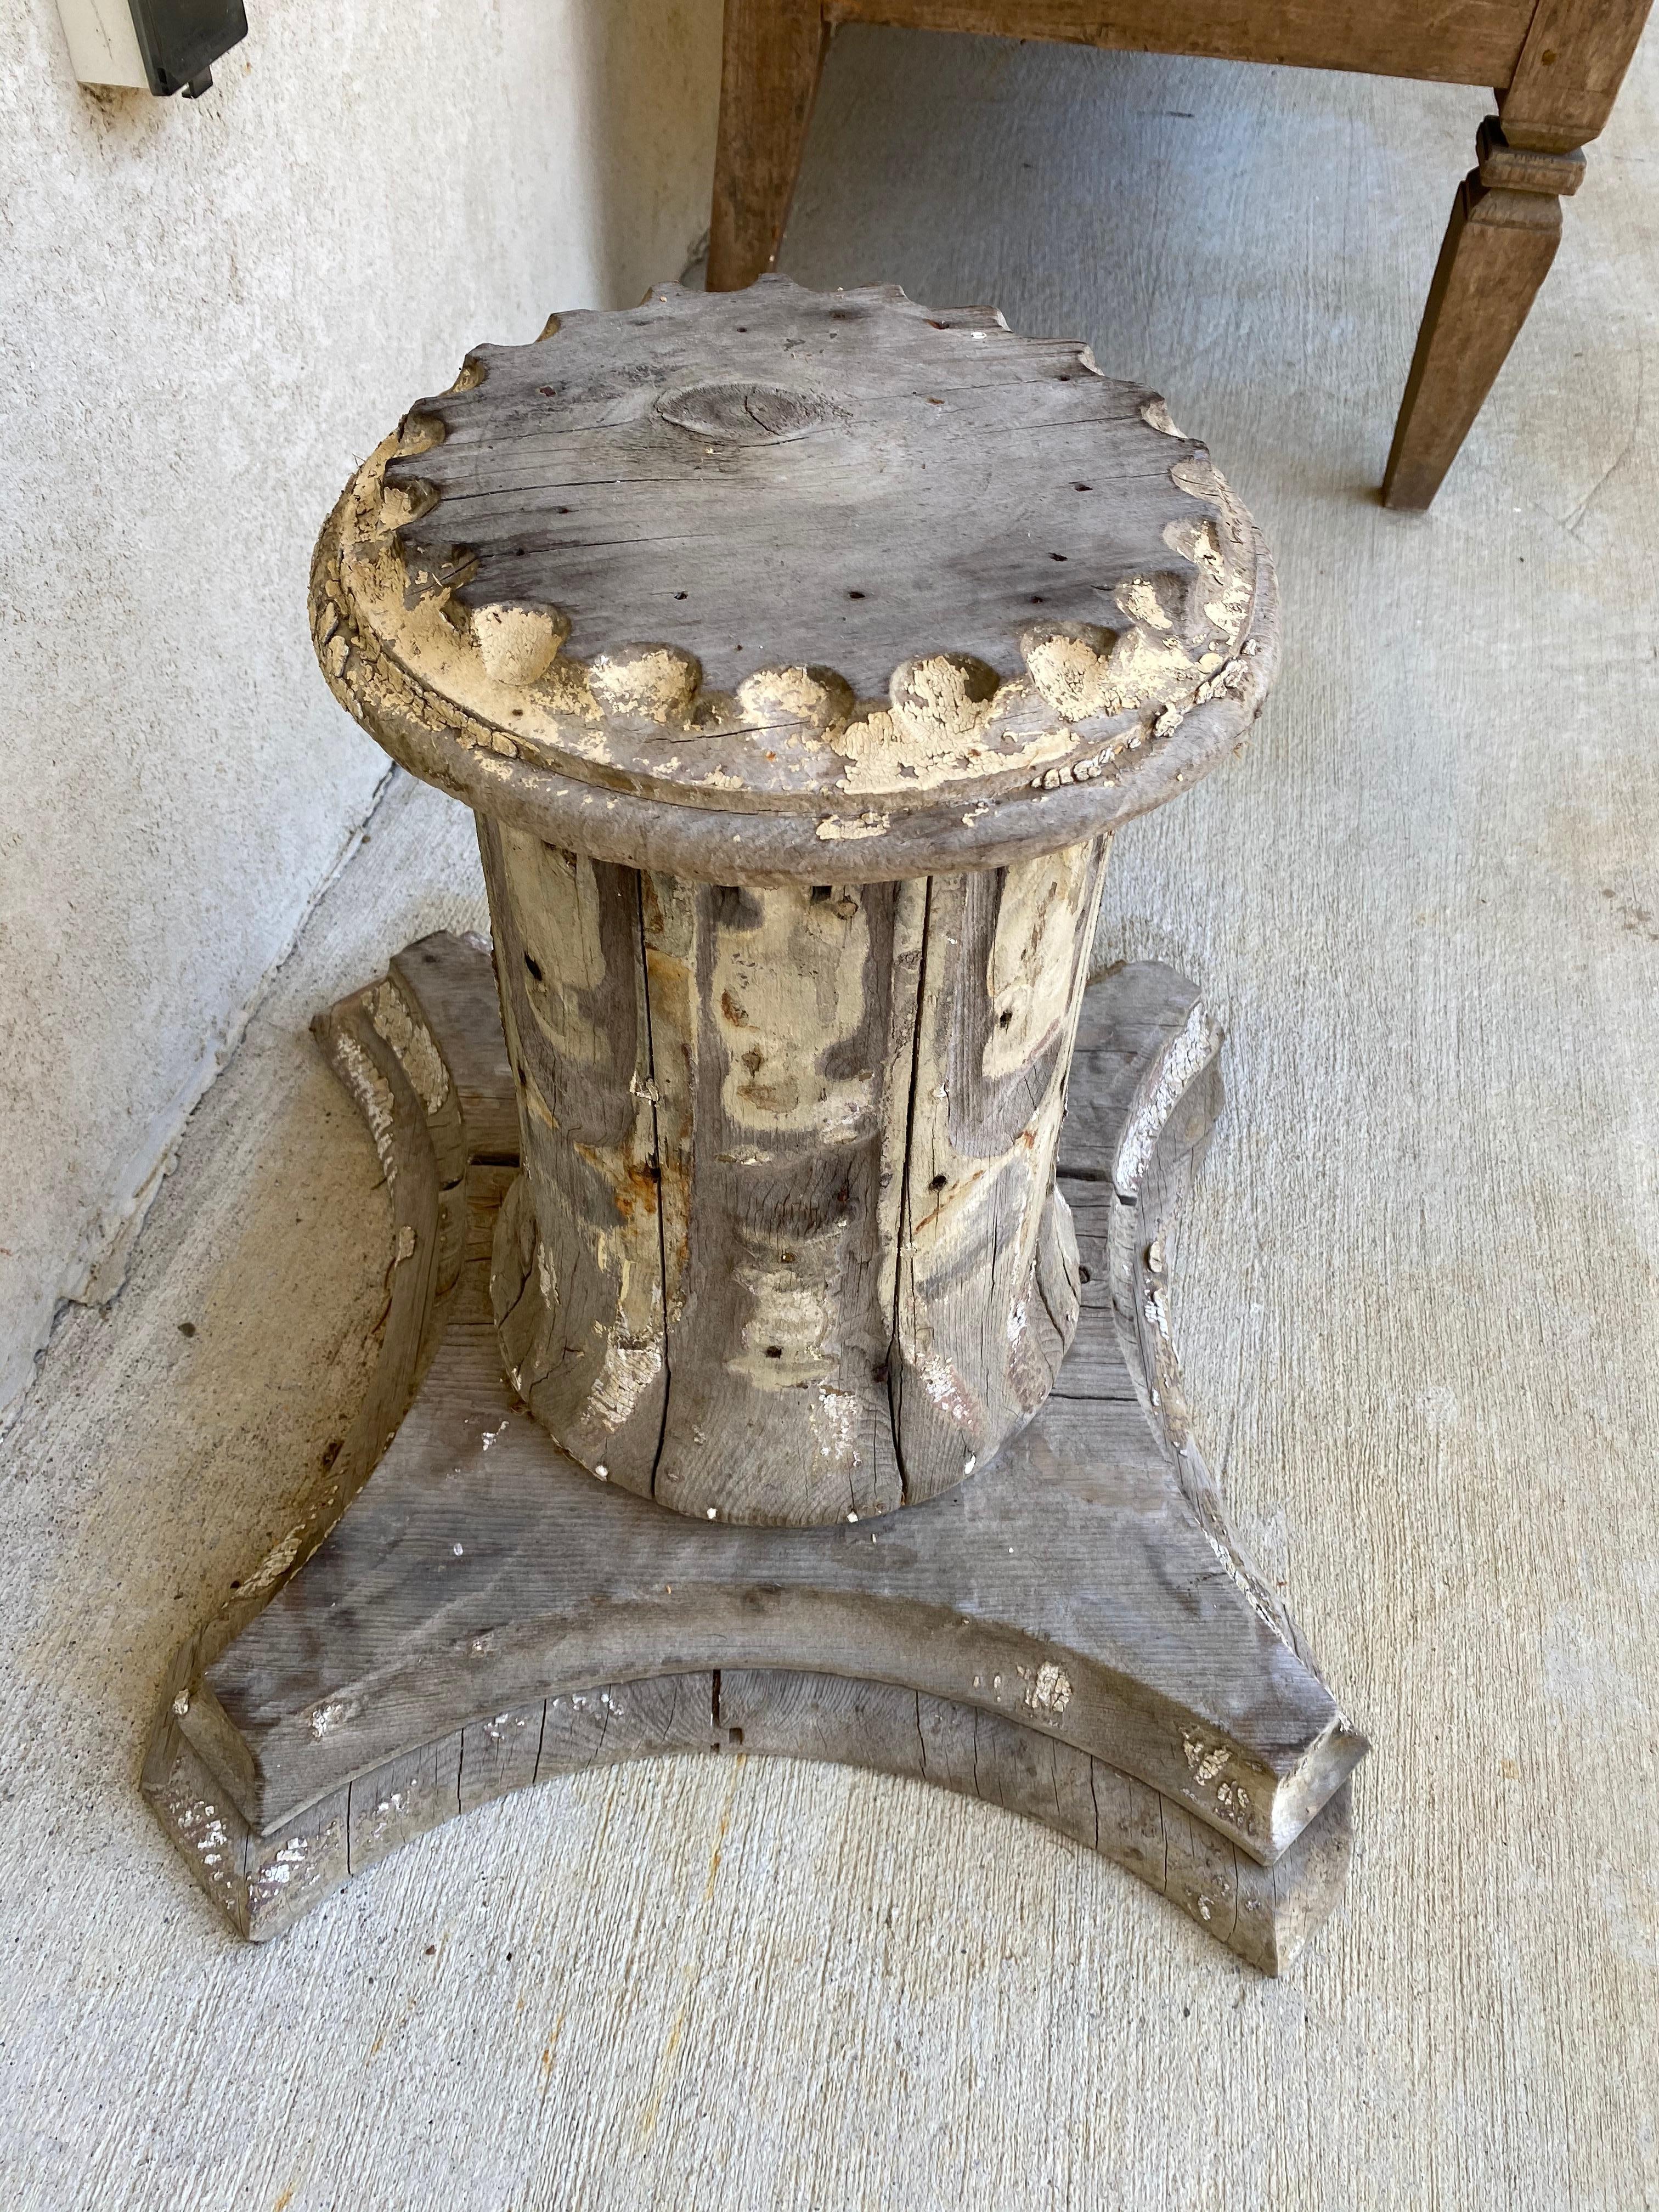 The very rustic antique wooden column plinth, pedestal or base in the classical style can be used as side table, end table or pedestal for either indoor or outdoor use -- casual, Classic, Swedish or Gustavian Style decor. White paint has been mostly